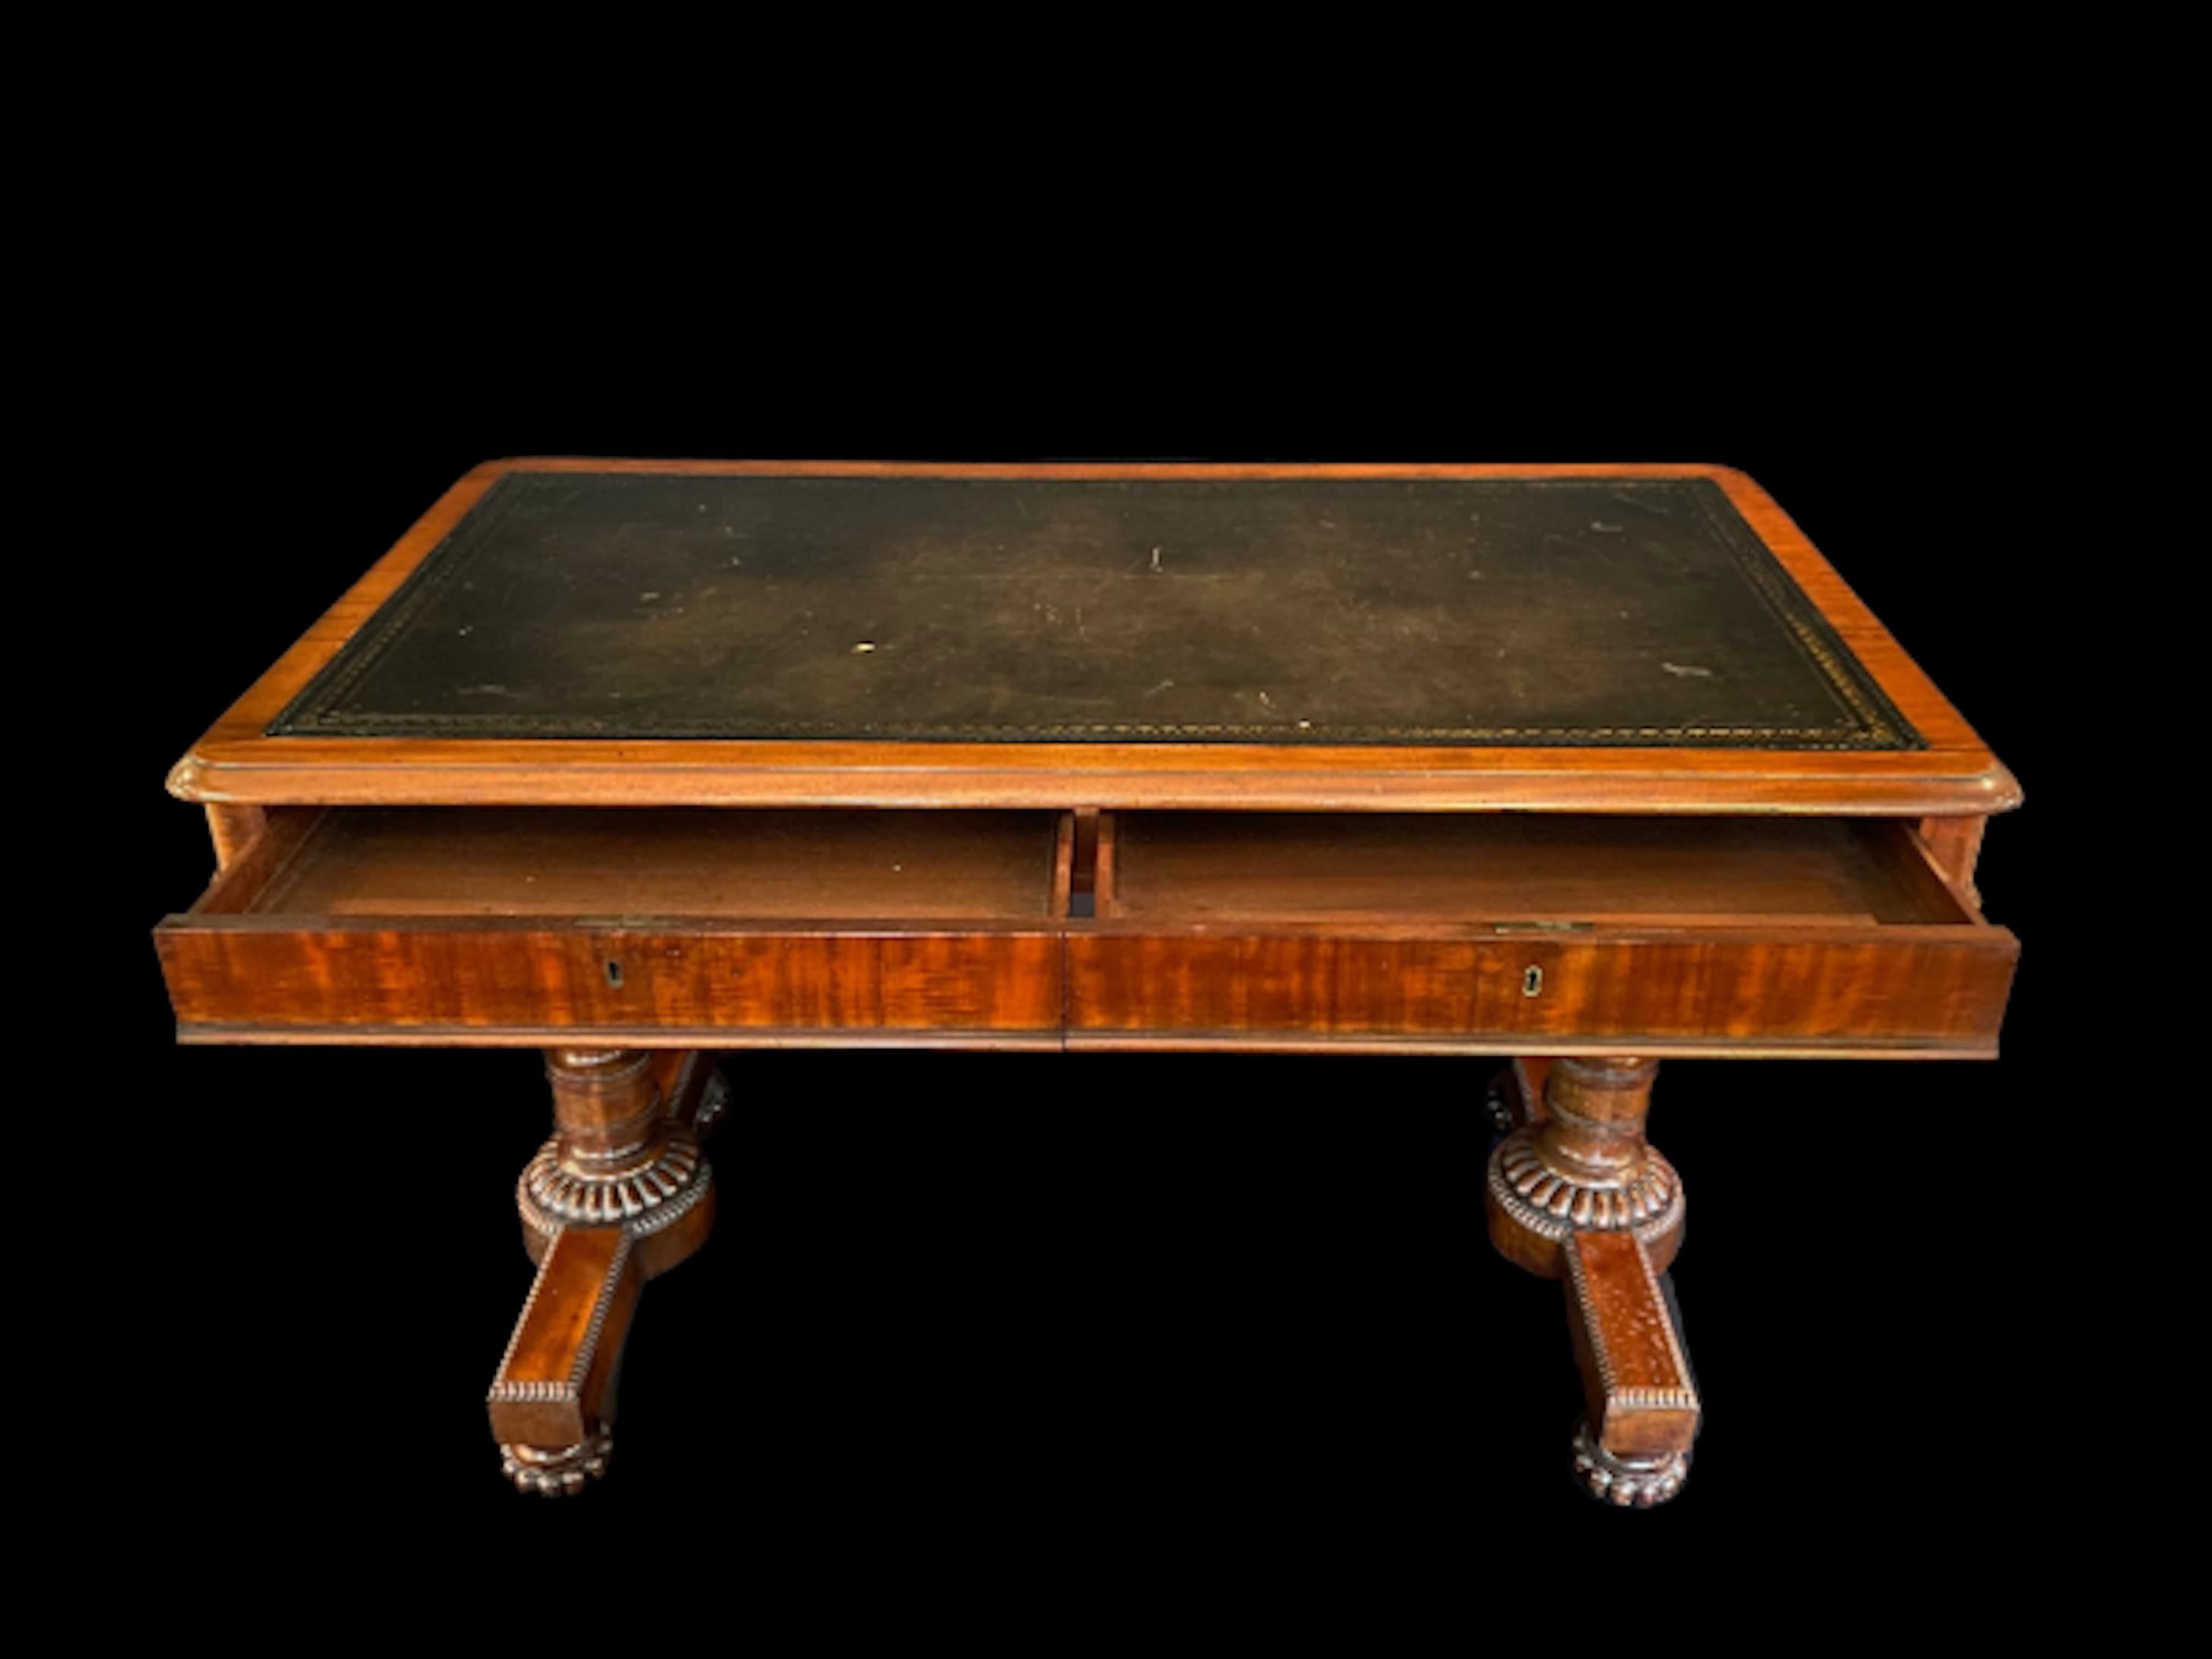 Leather Topped Regency Rectangular Mahogany Pedestal Table In Good Condition For Sale In Shrewsbury, GB